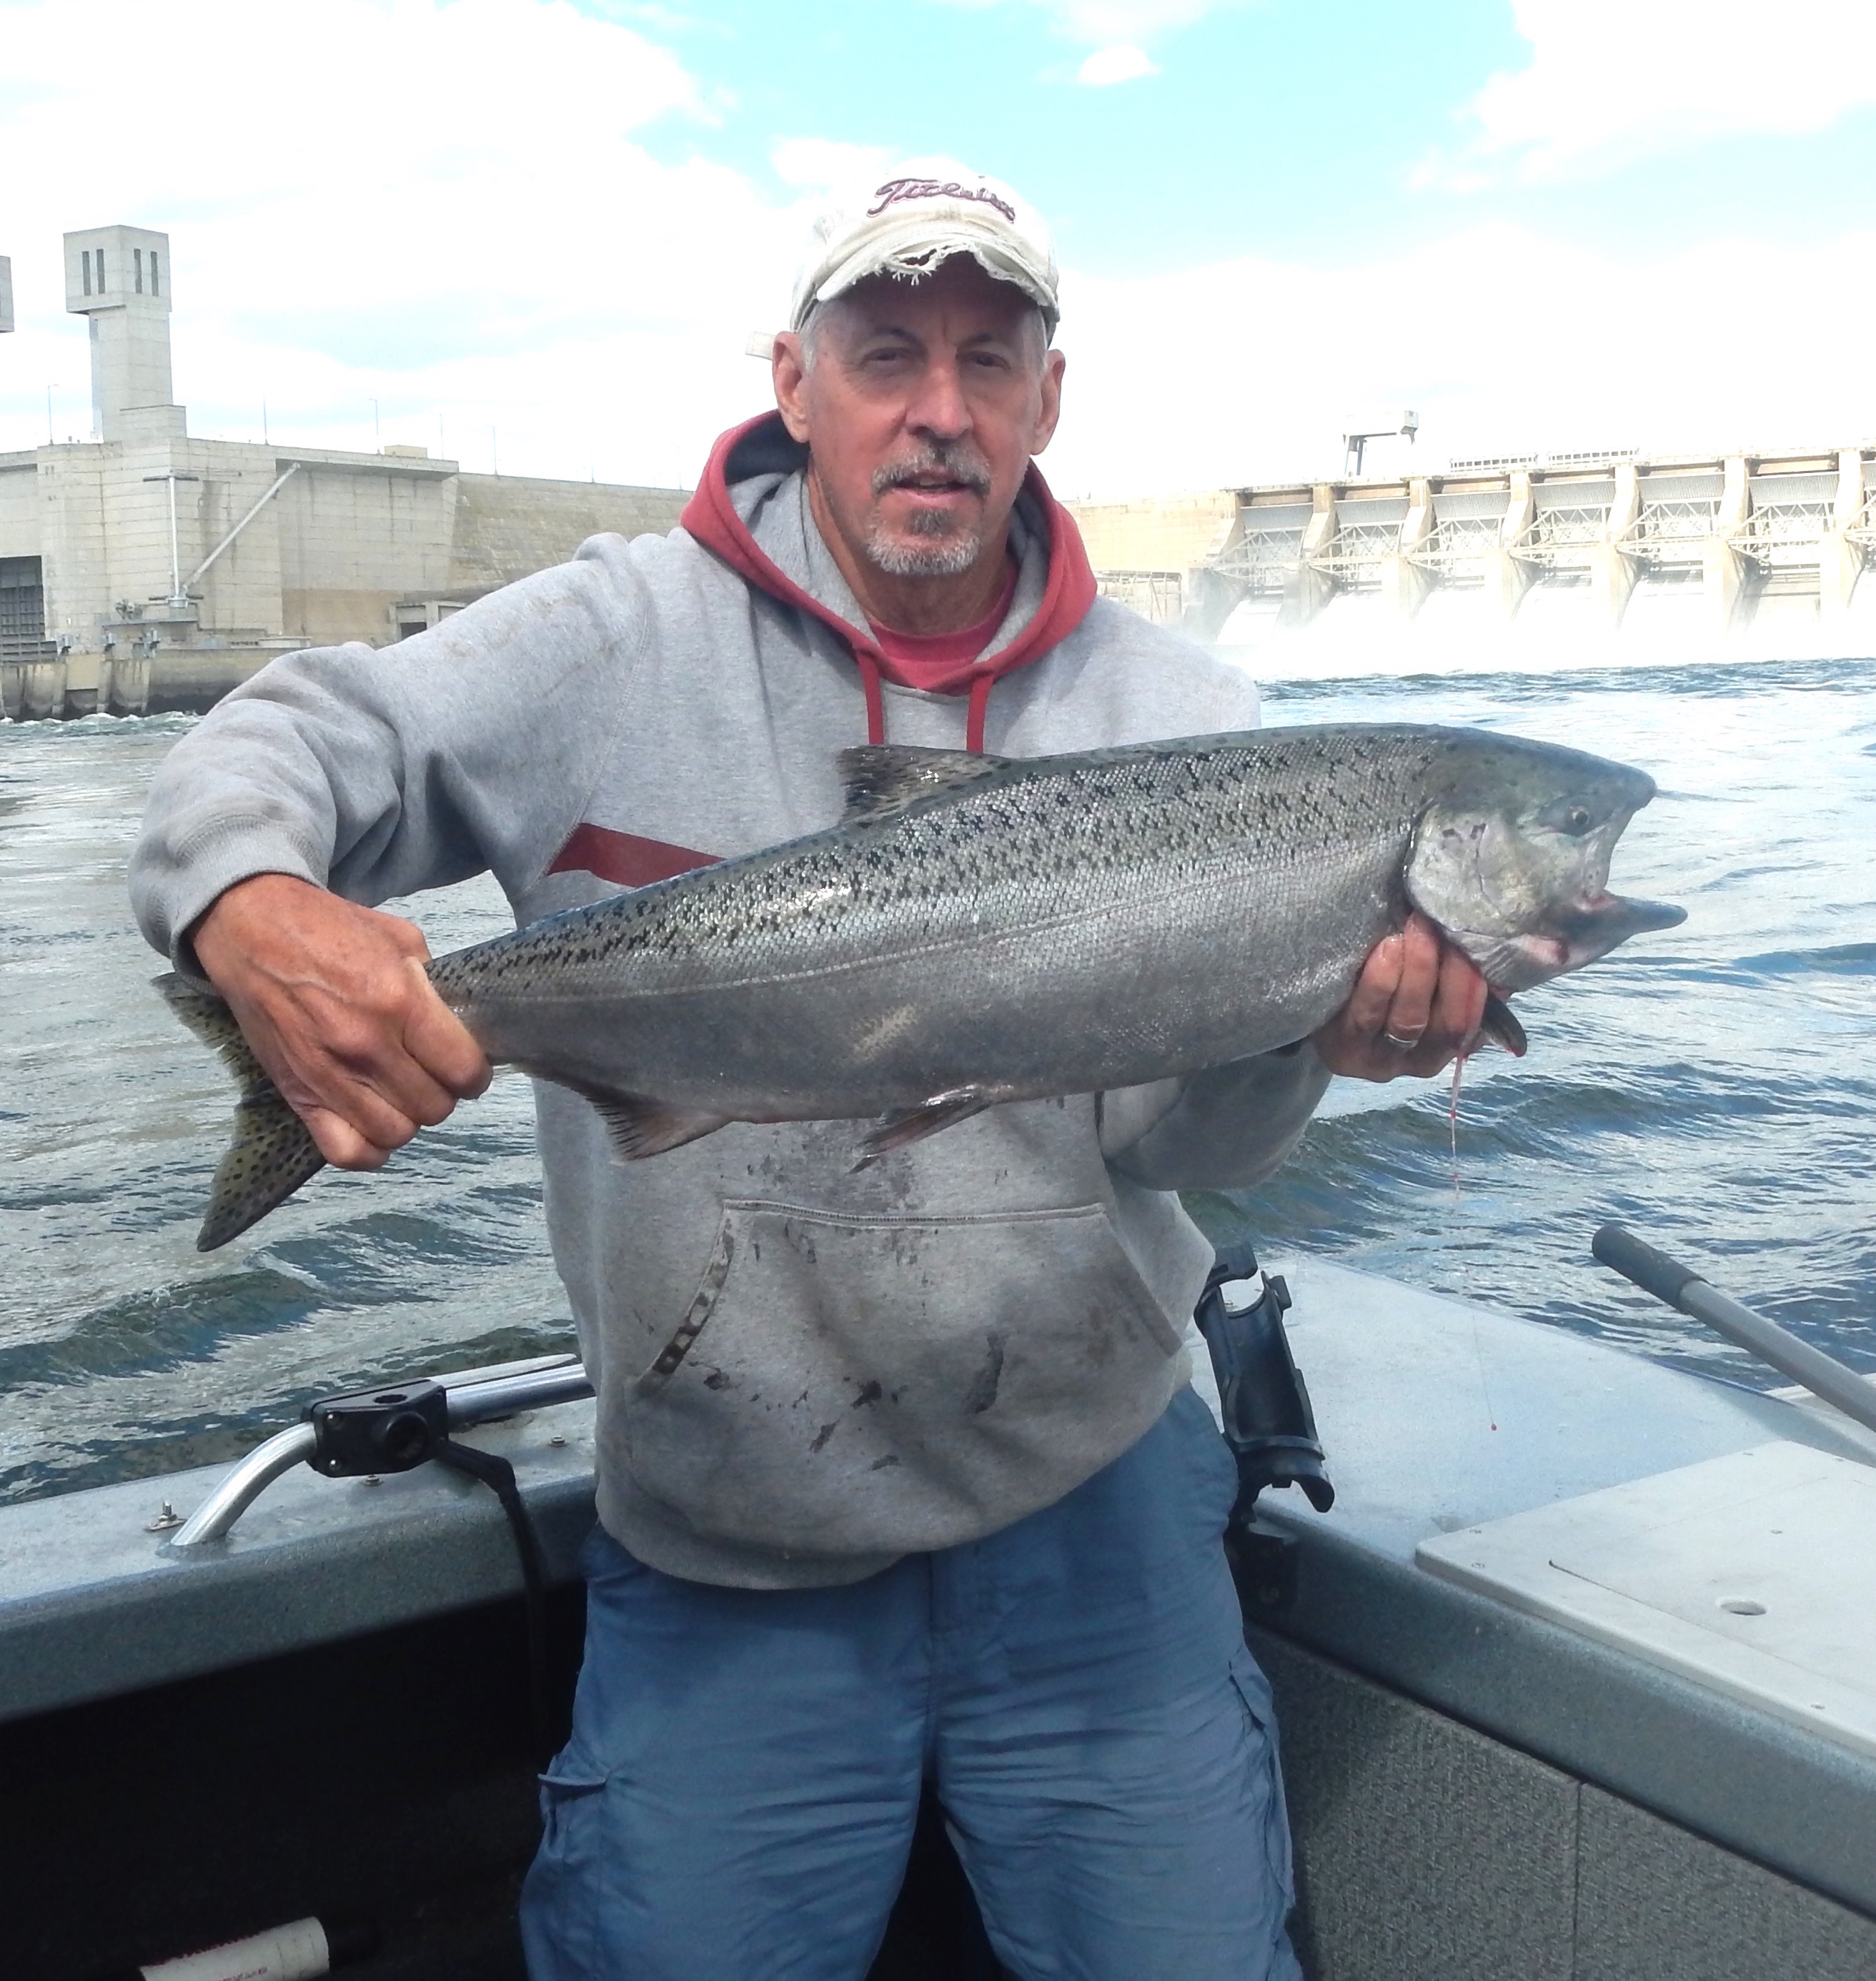 Spin Fishing For Salmon: 5 Most Effective Methods And Baits